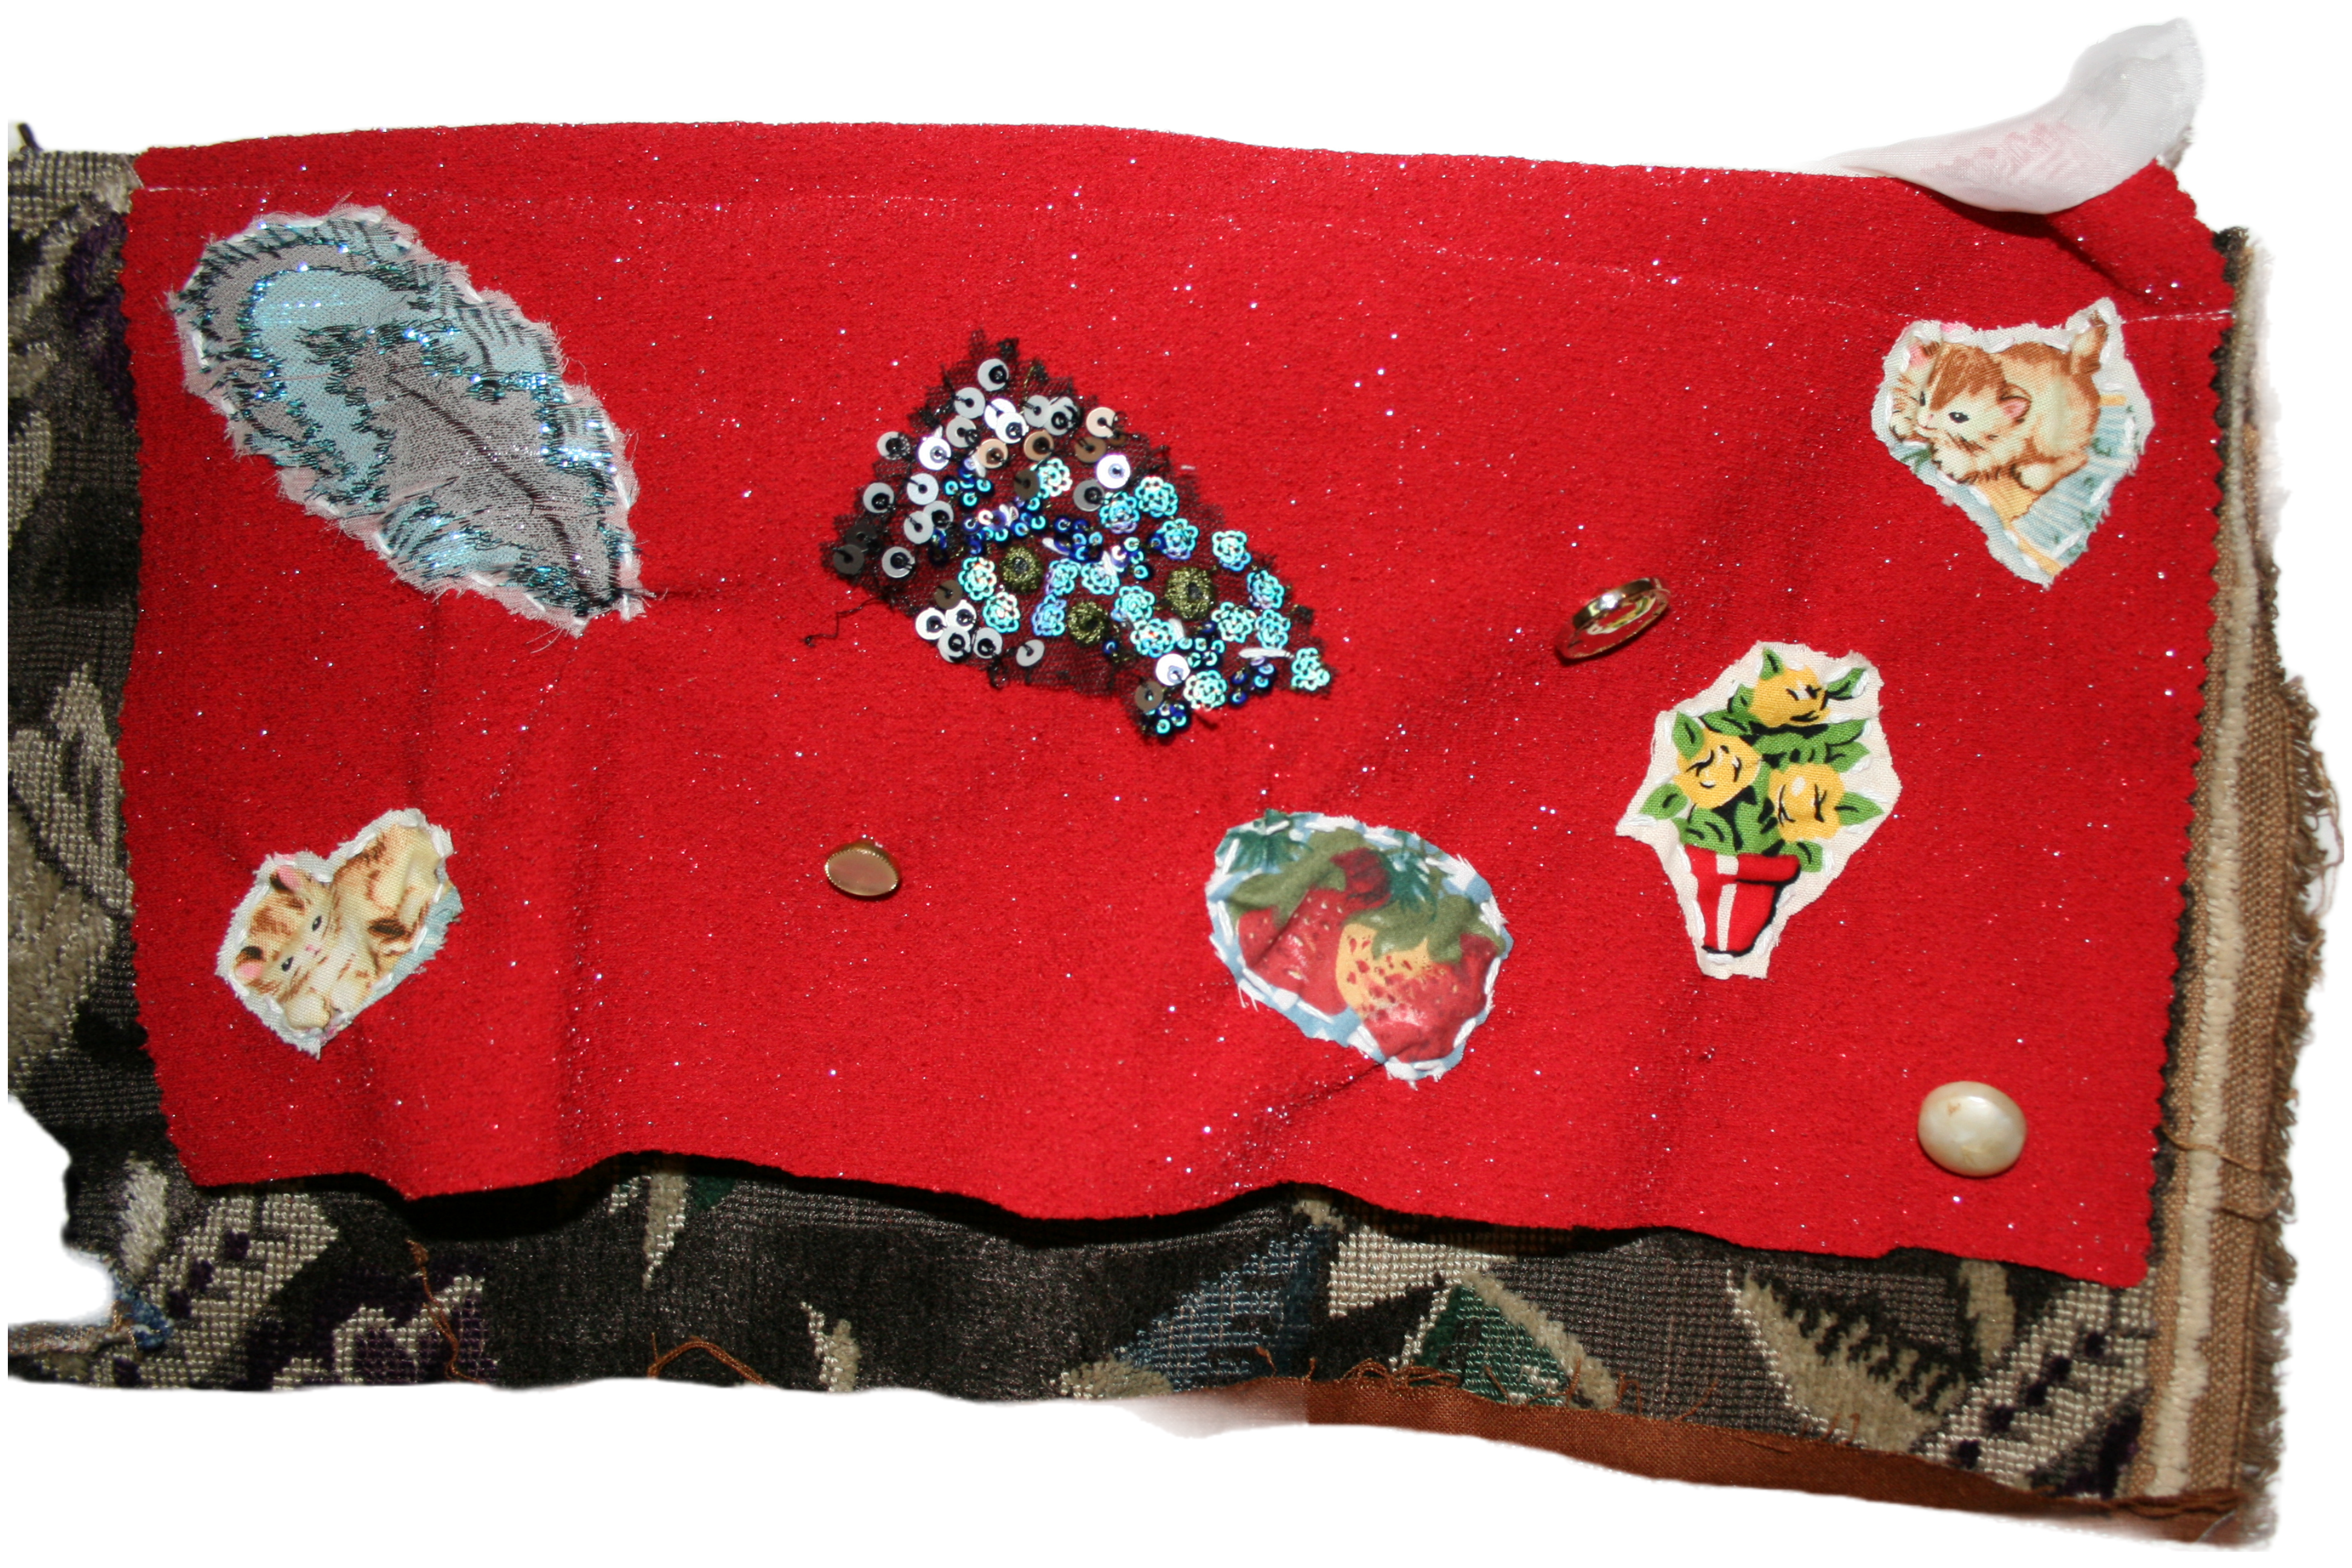 Close up photo of the upper right corner of the piece. There is a piece of red fabric with three buttons sewn on it, a feather in the left corner, two cats on the left and right side, some strawberries in the middle, a pot of flowers next to it, and some sequins on the upper side.
